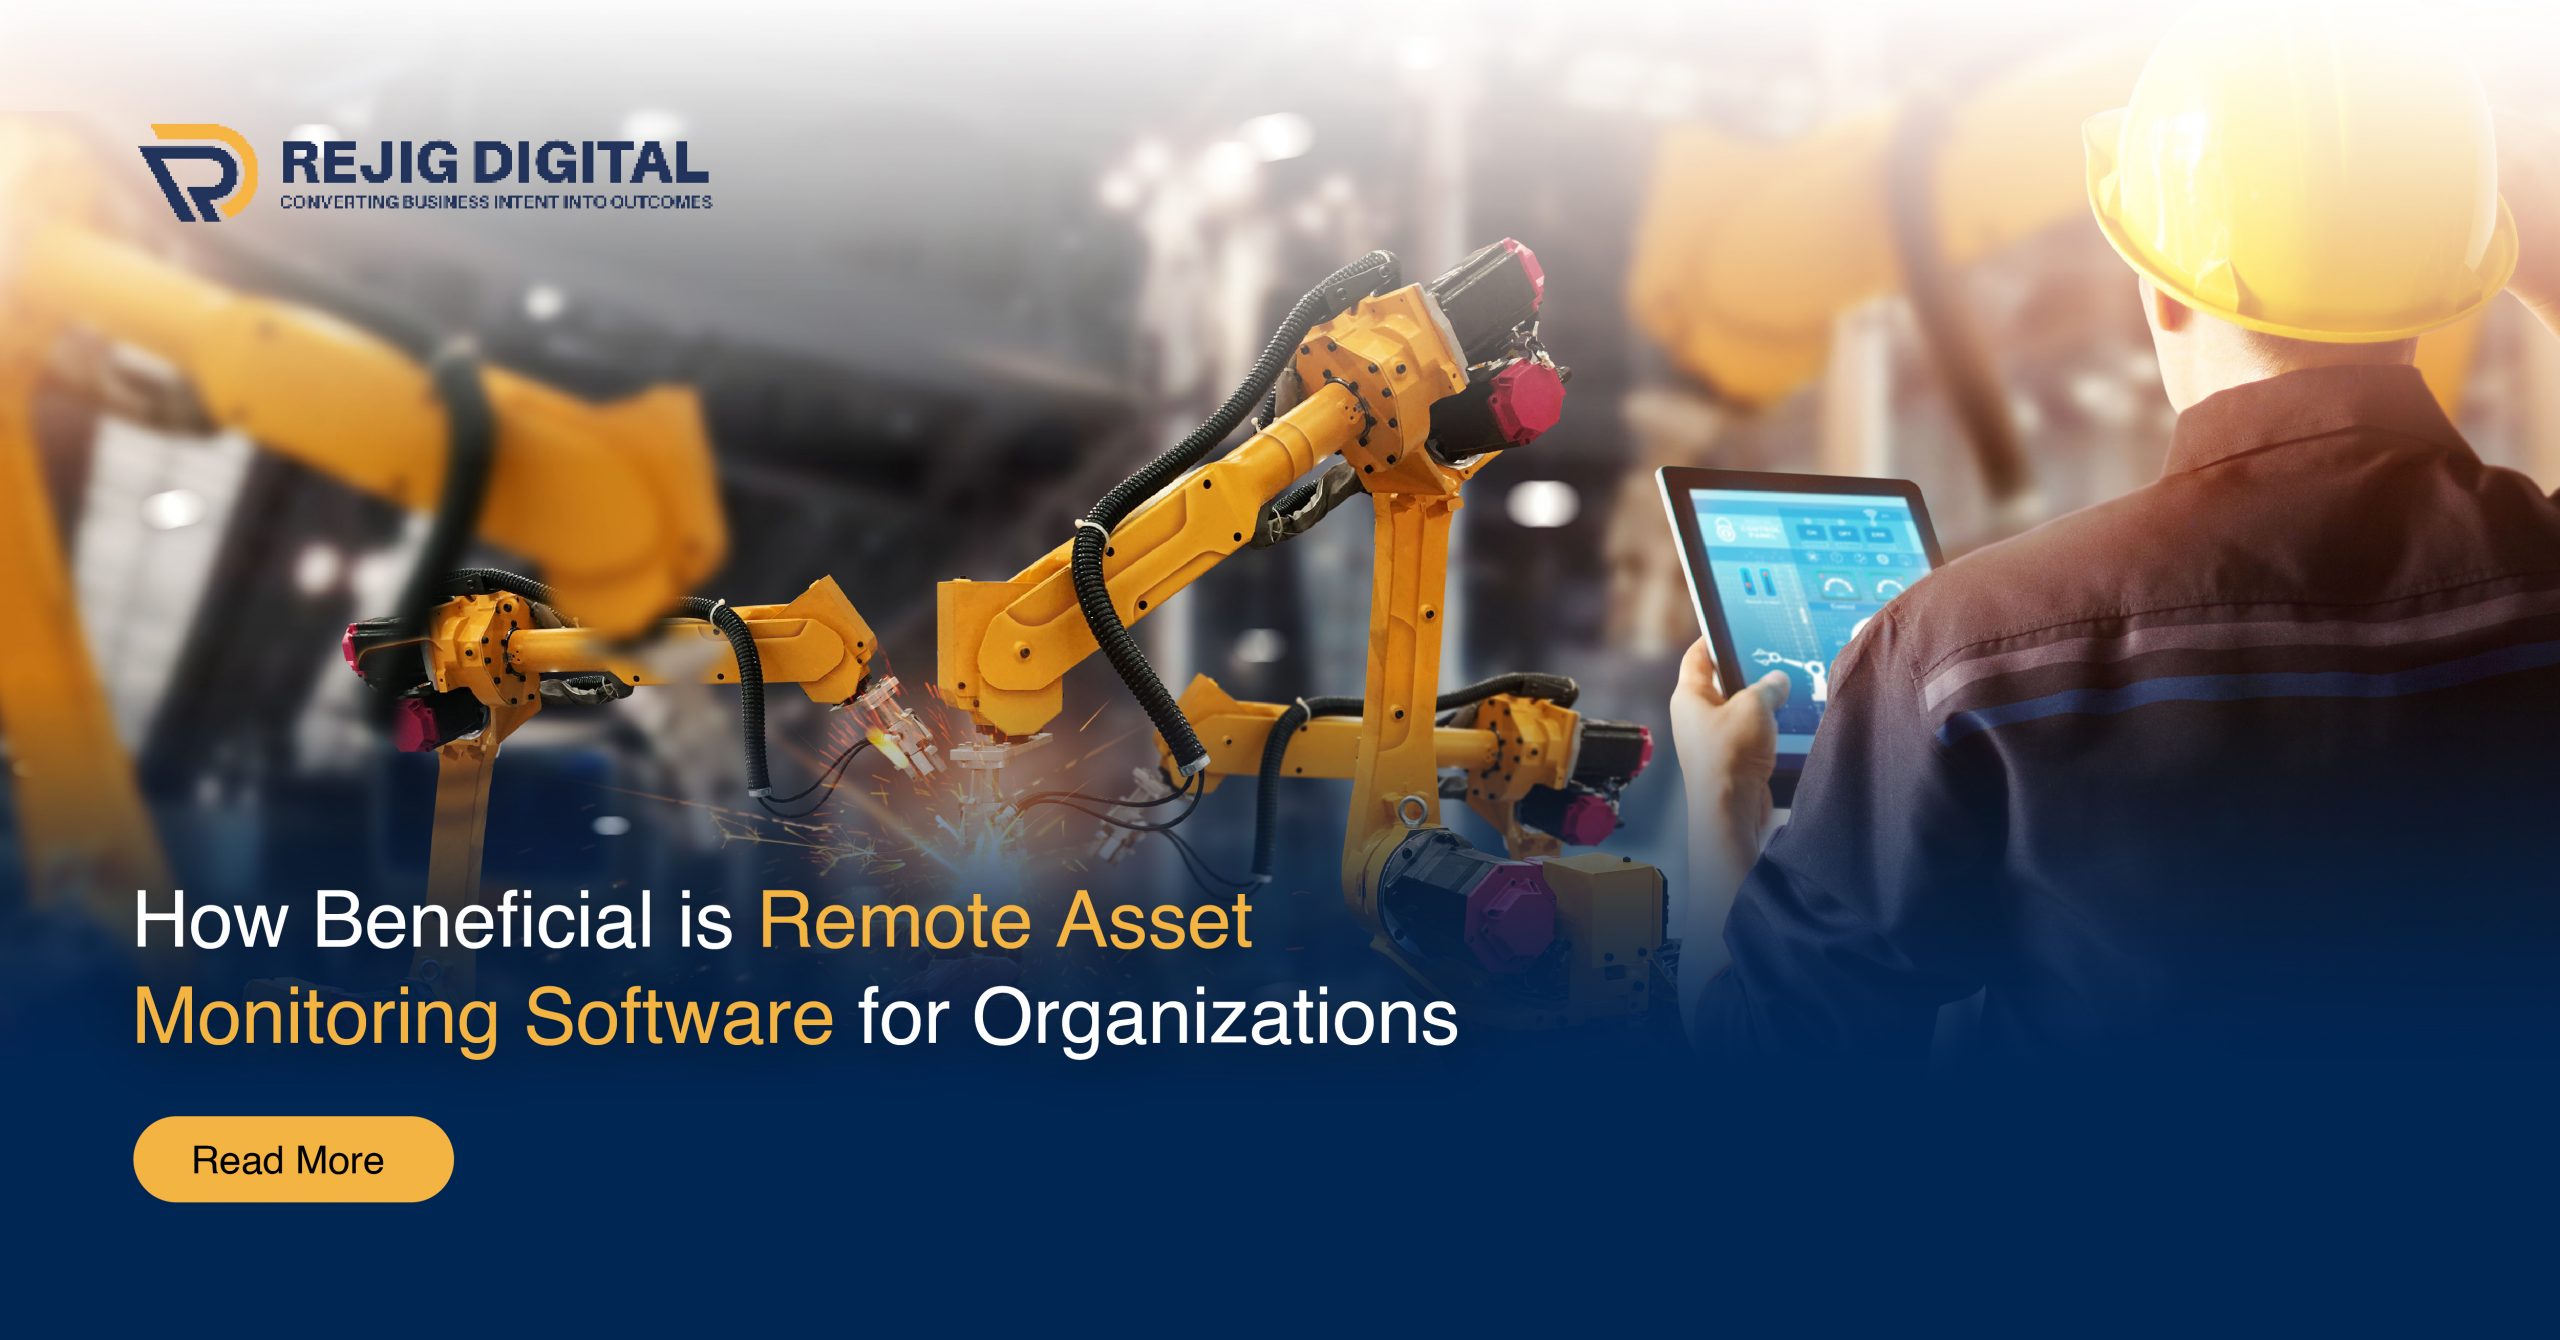 How Beneficial is Remote Asset Monitoring Software for Organizations